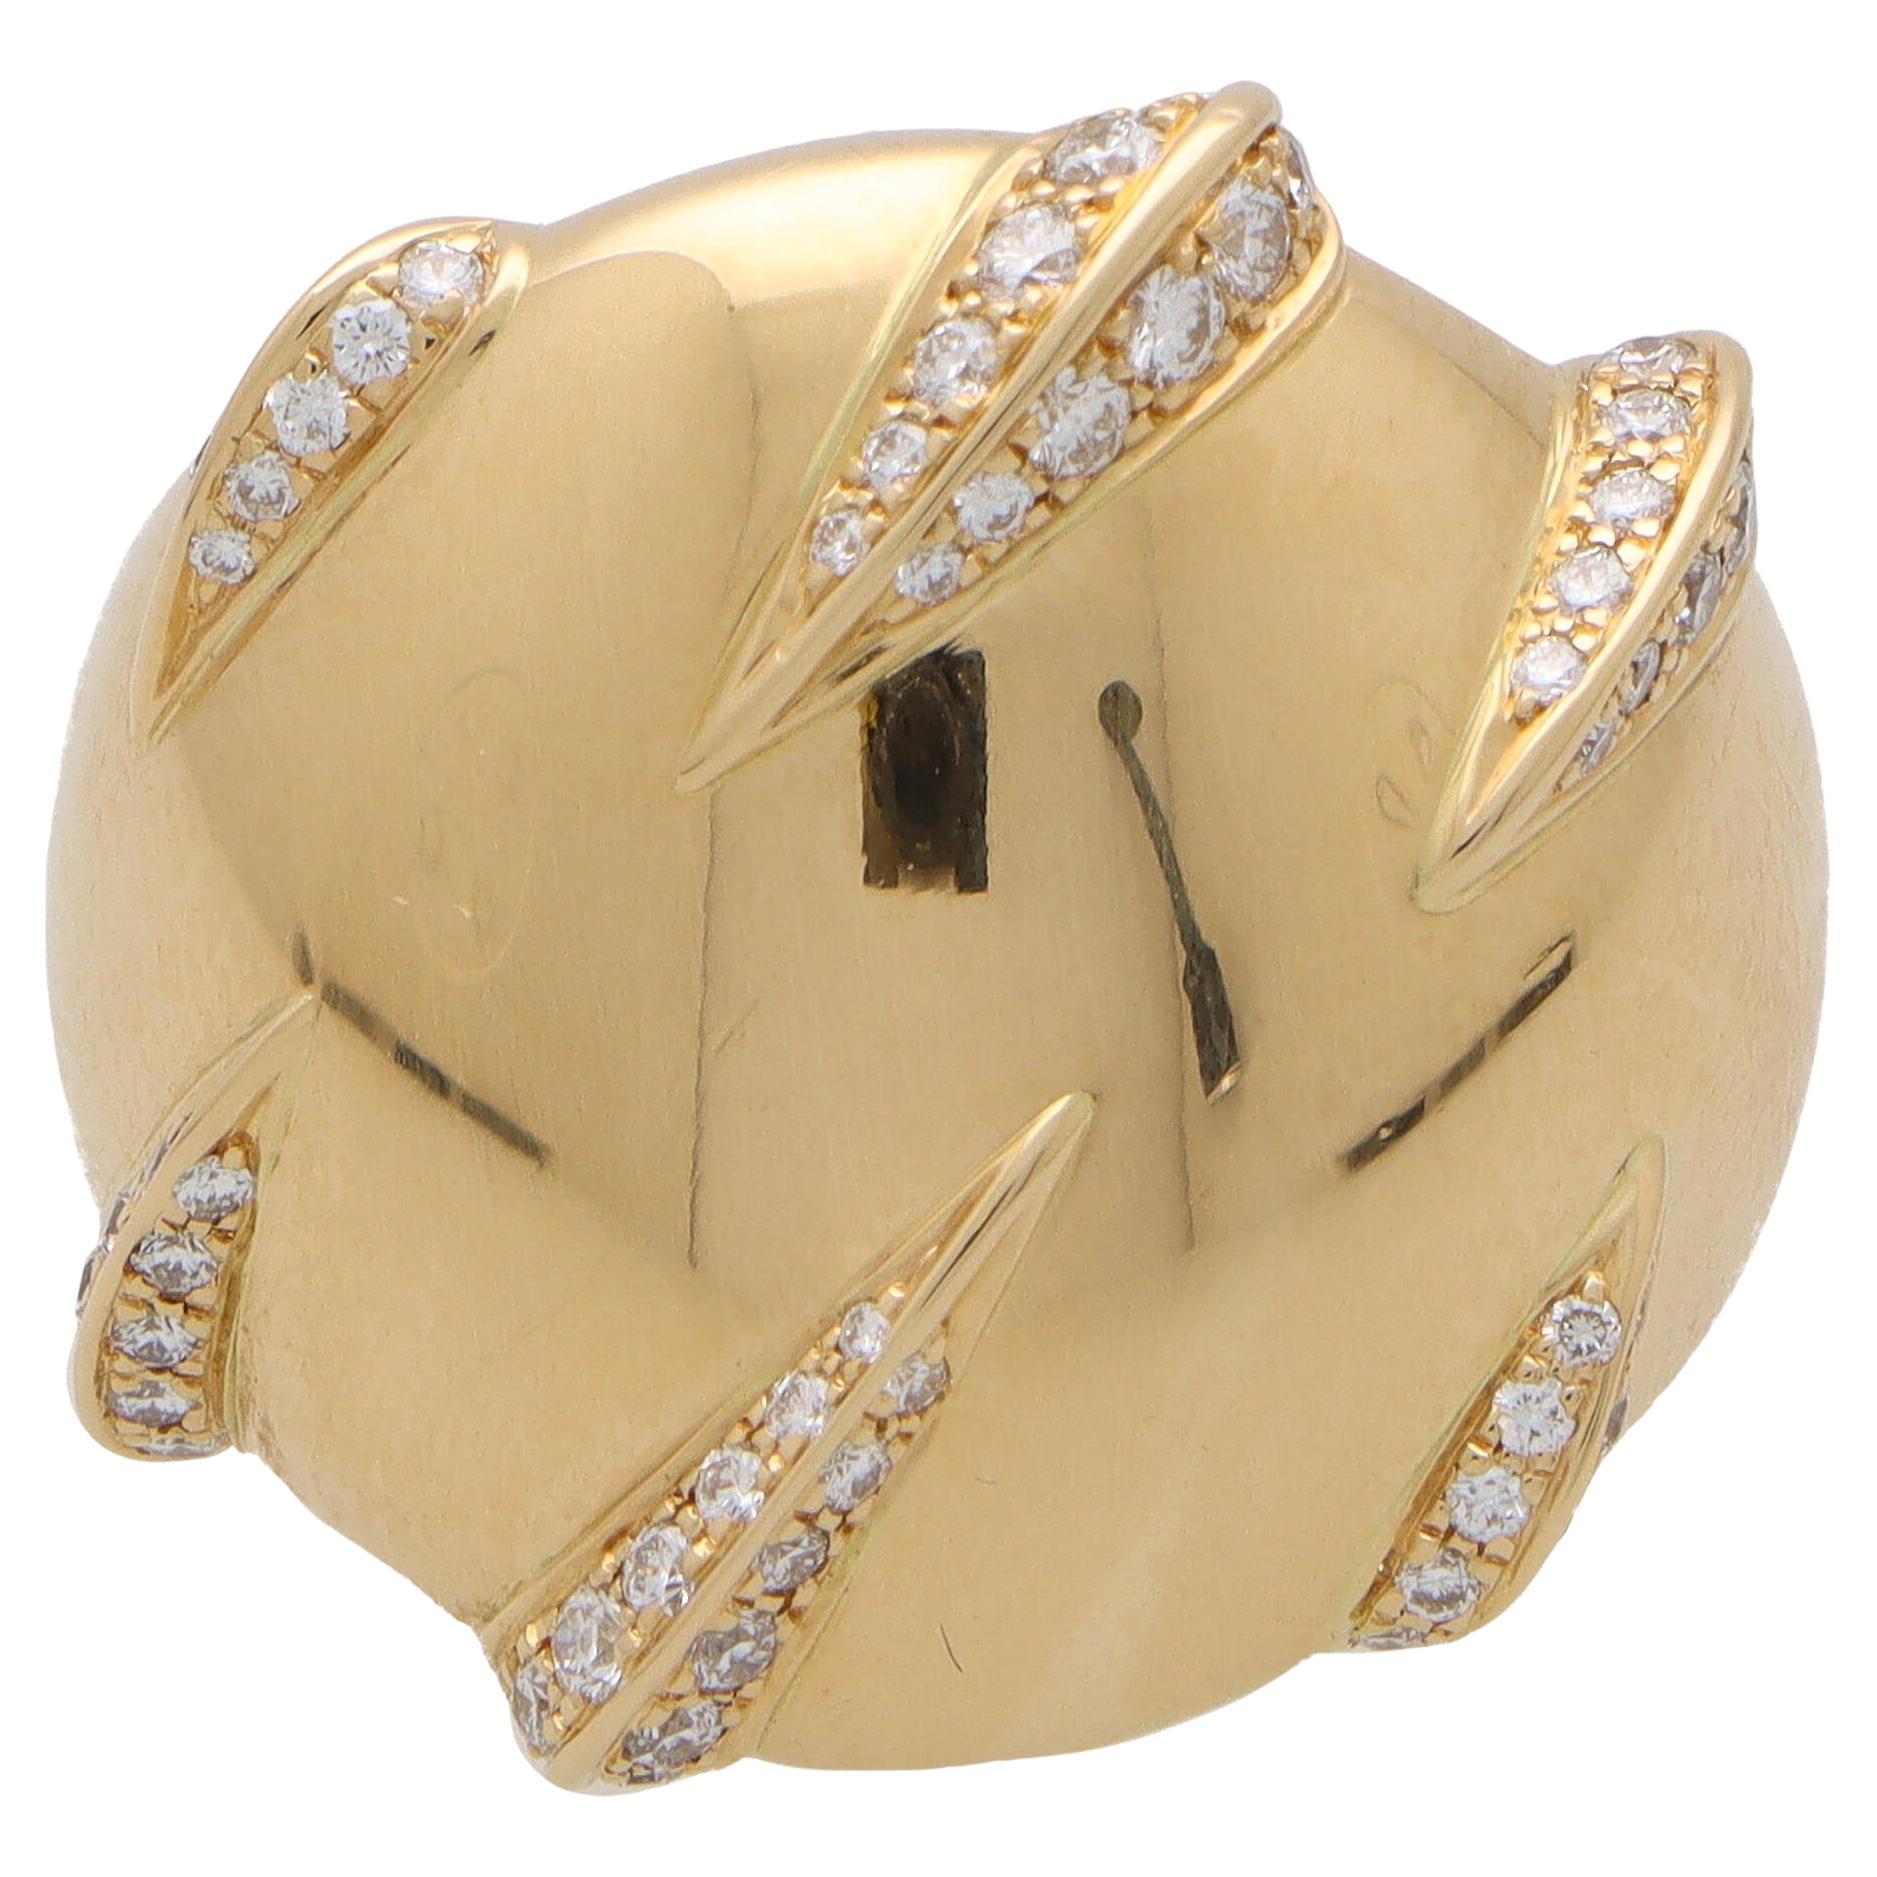 Vintage Cartier Diamond 'Panther Claw' Dress Ring in 18k Yellow Gold